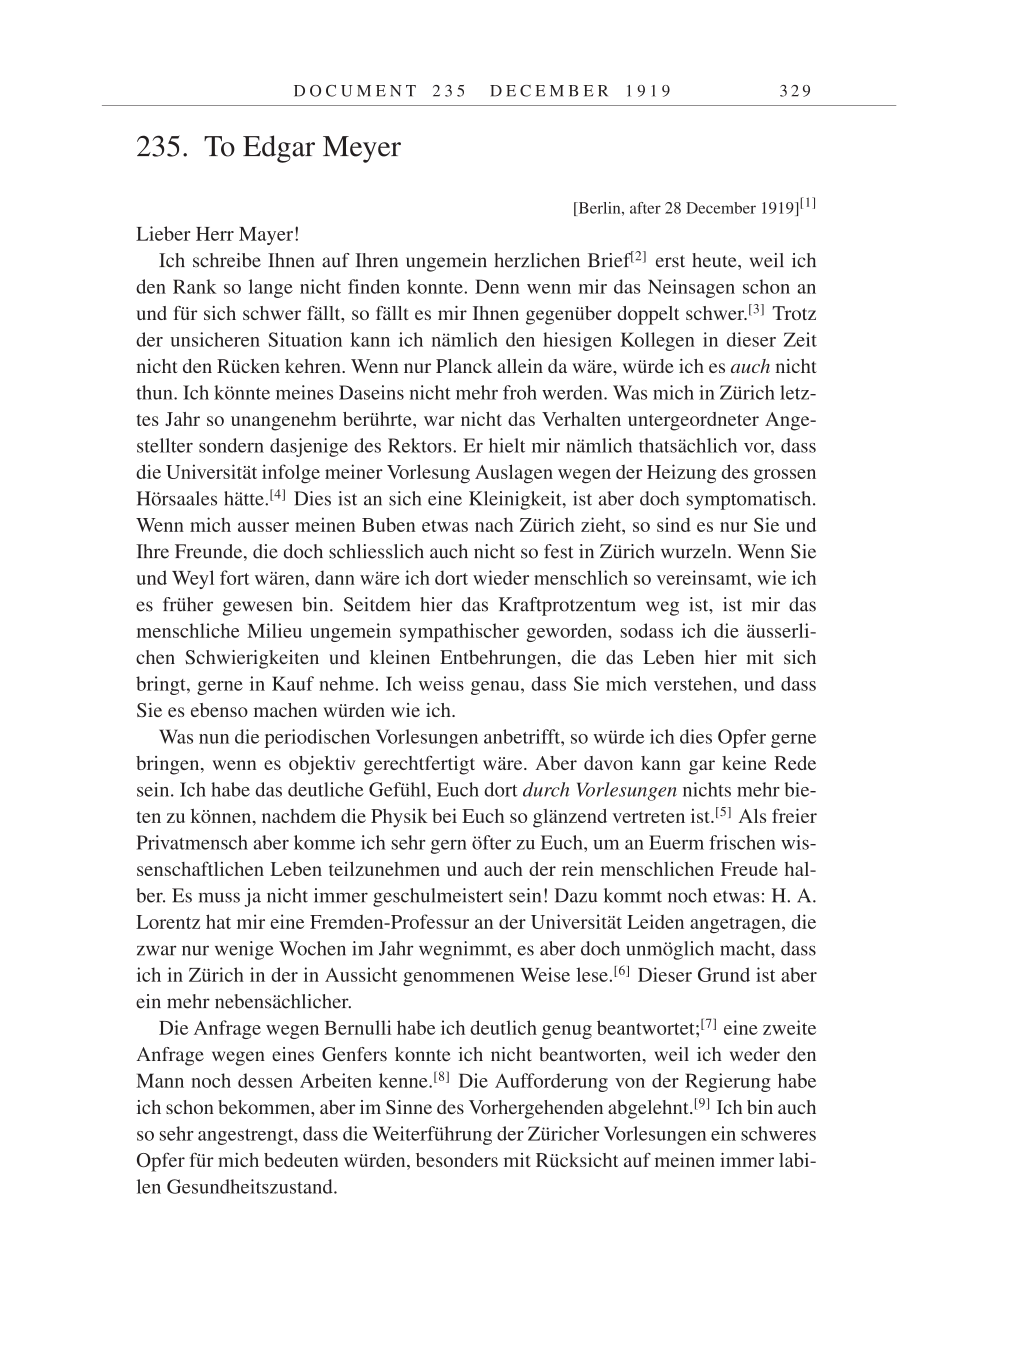 Volume 9: The Berlin Years: Correspondence January 1919-April 1920 page 329